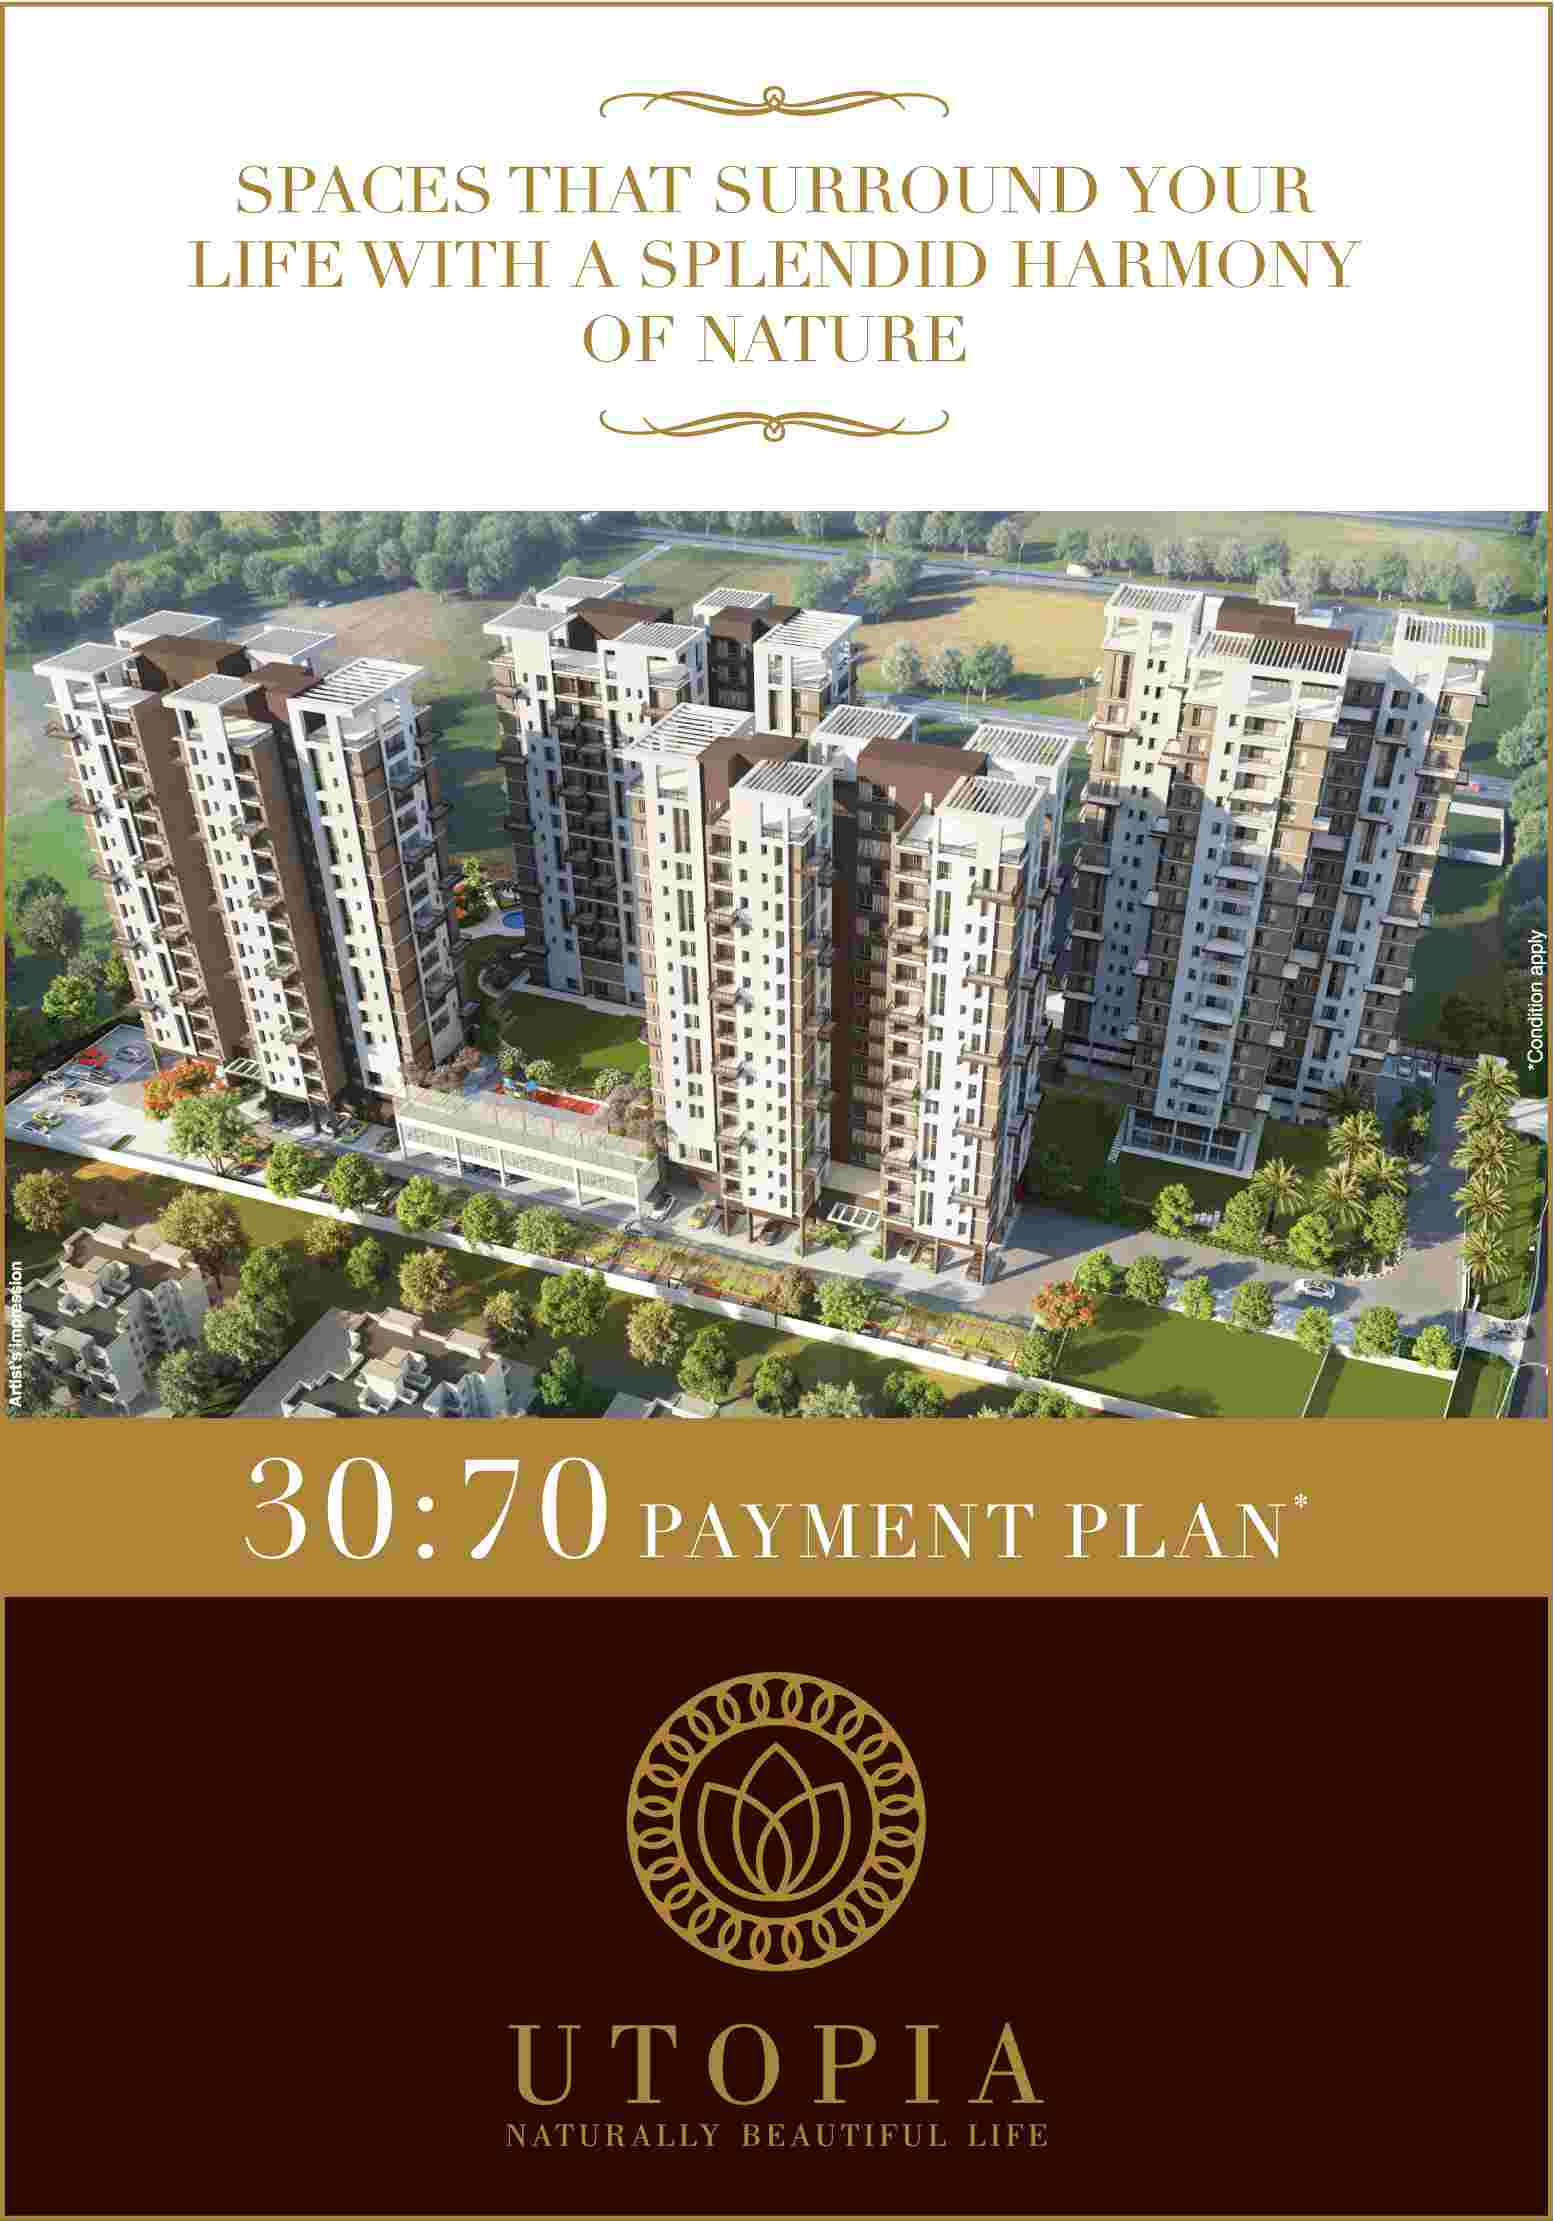 Book home with 30:70 payment plan at Shivom Utopia in Kolkata Update